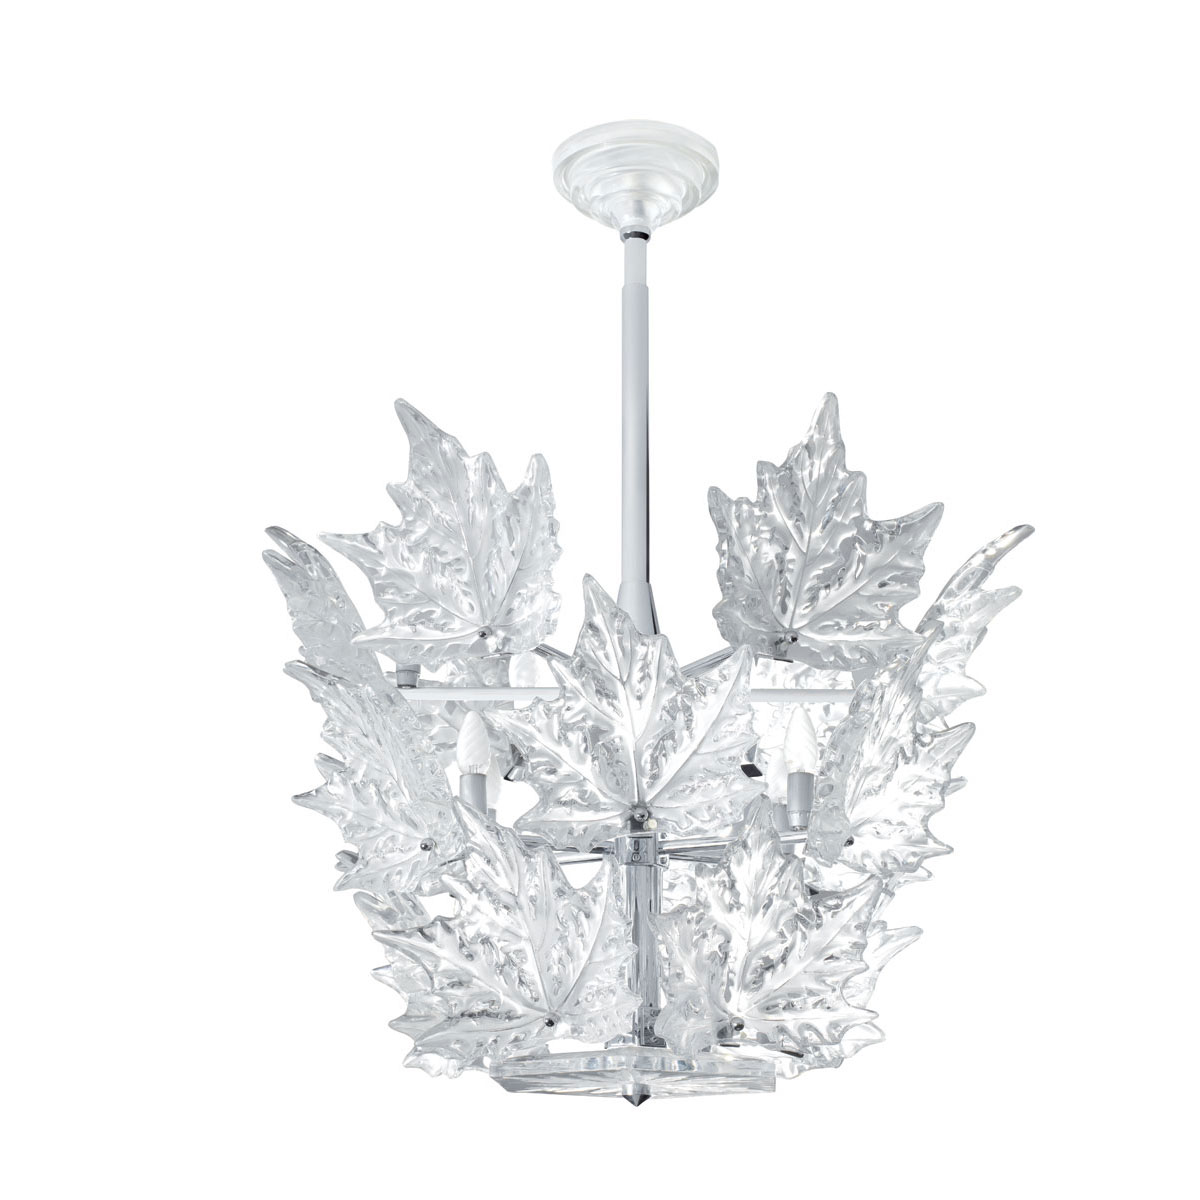 Lalique Champs Elysees 3 Tiers Crystal Chandelier Clear, Chrome